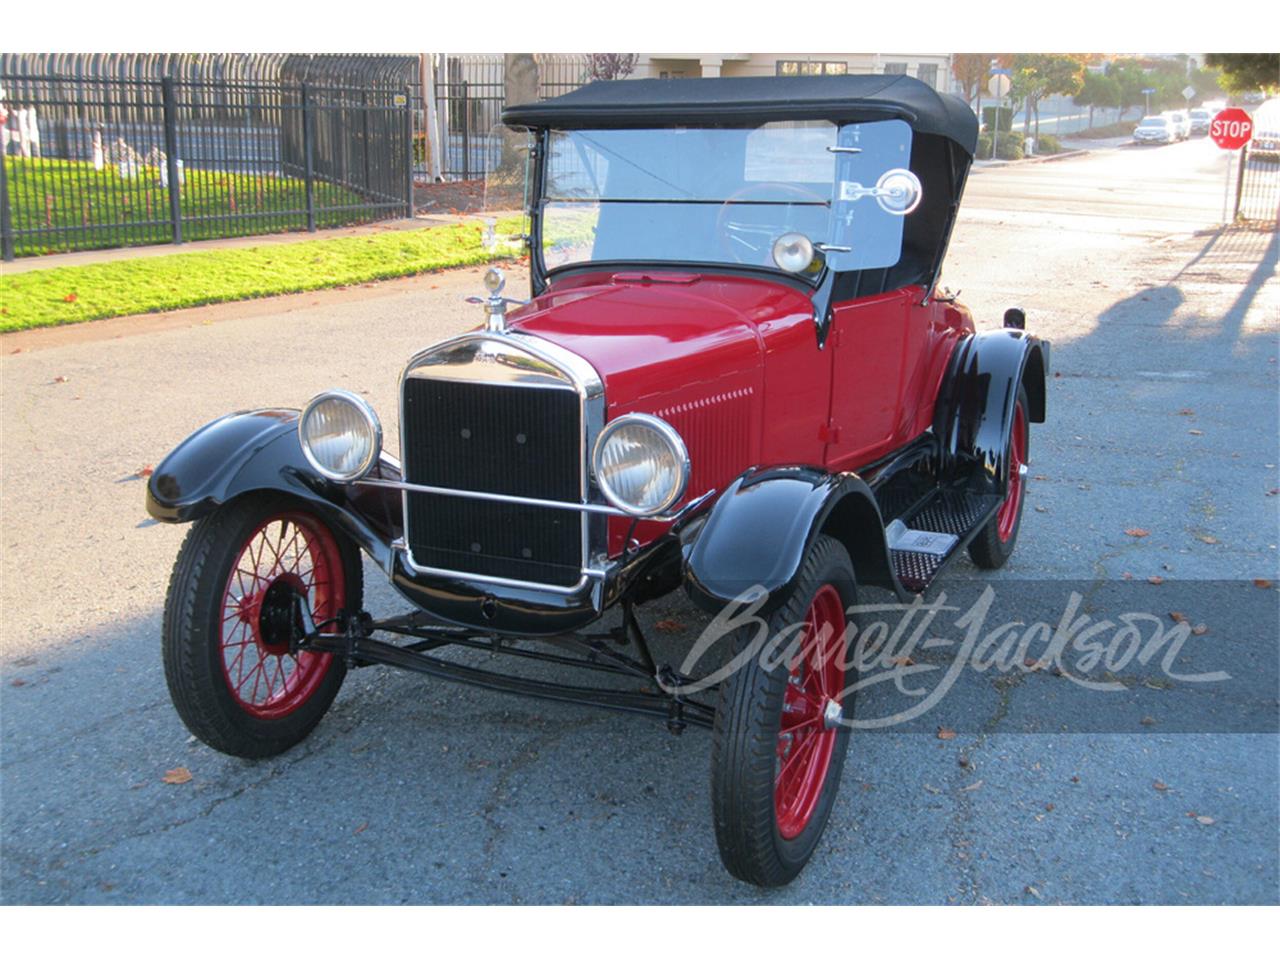 For Sale at Auction: 1927 Ford Model T in Scottsdale, Arizona for sale in Scottsdale, AZ